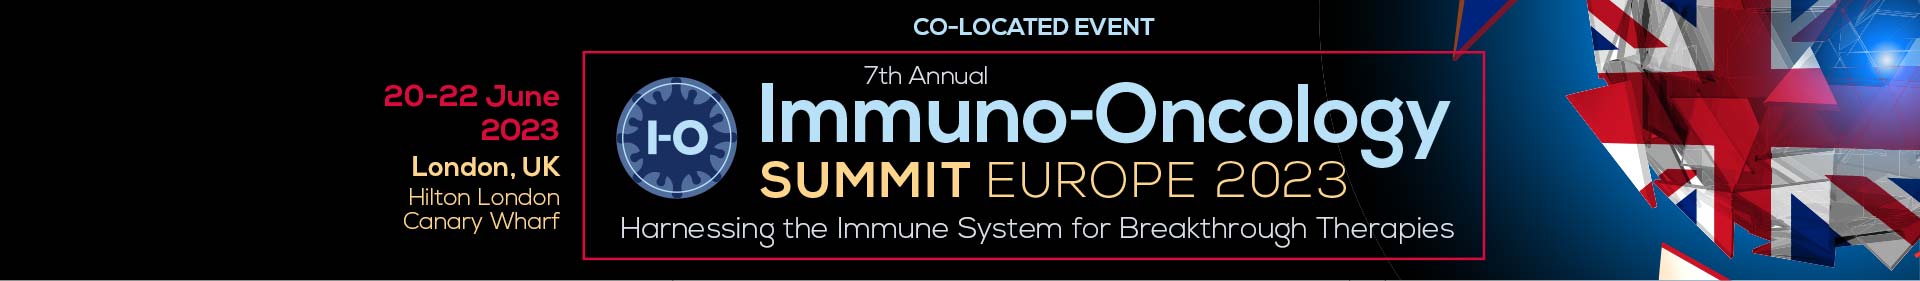 Co-Located Event - Immuno-Oncology Summit Europe 2023